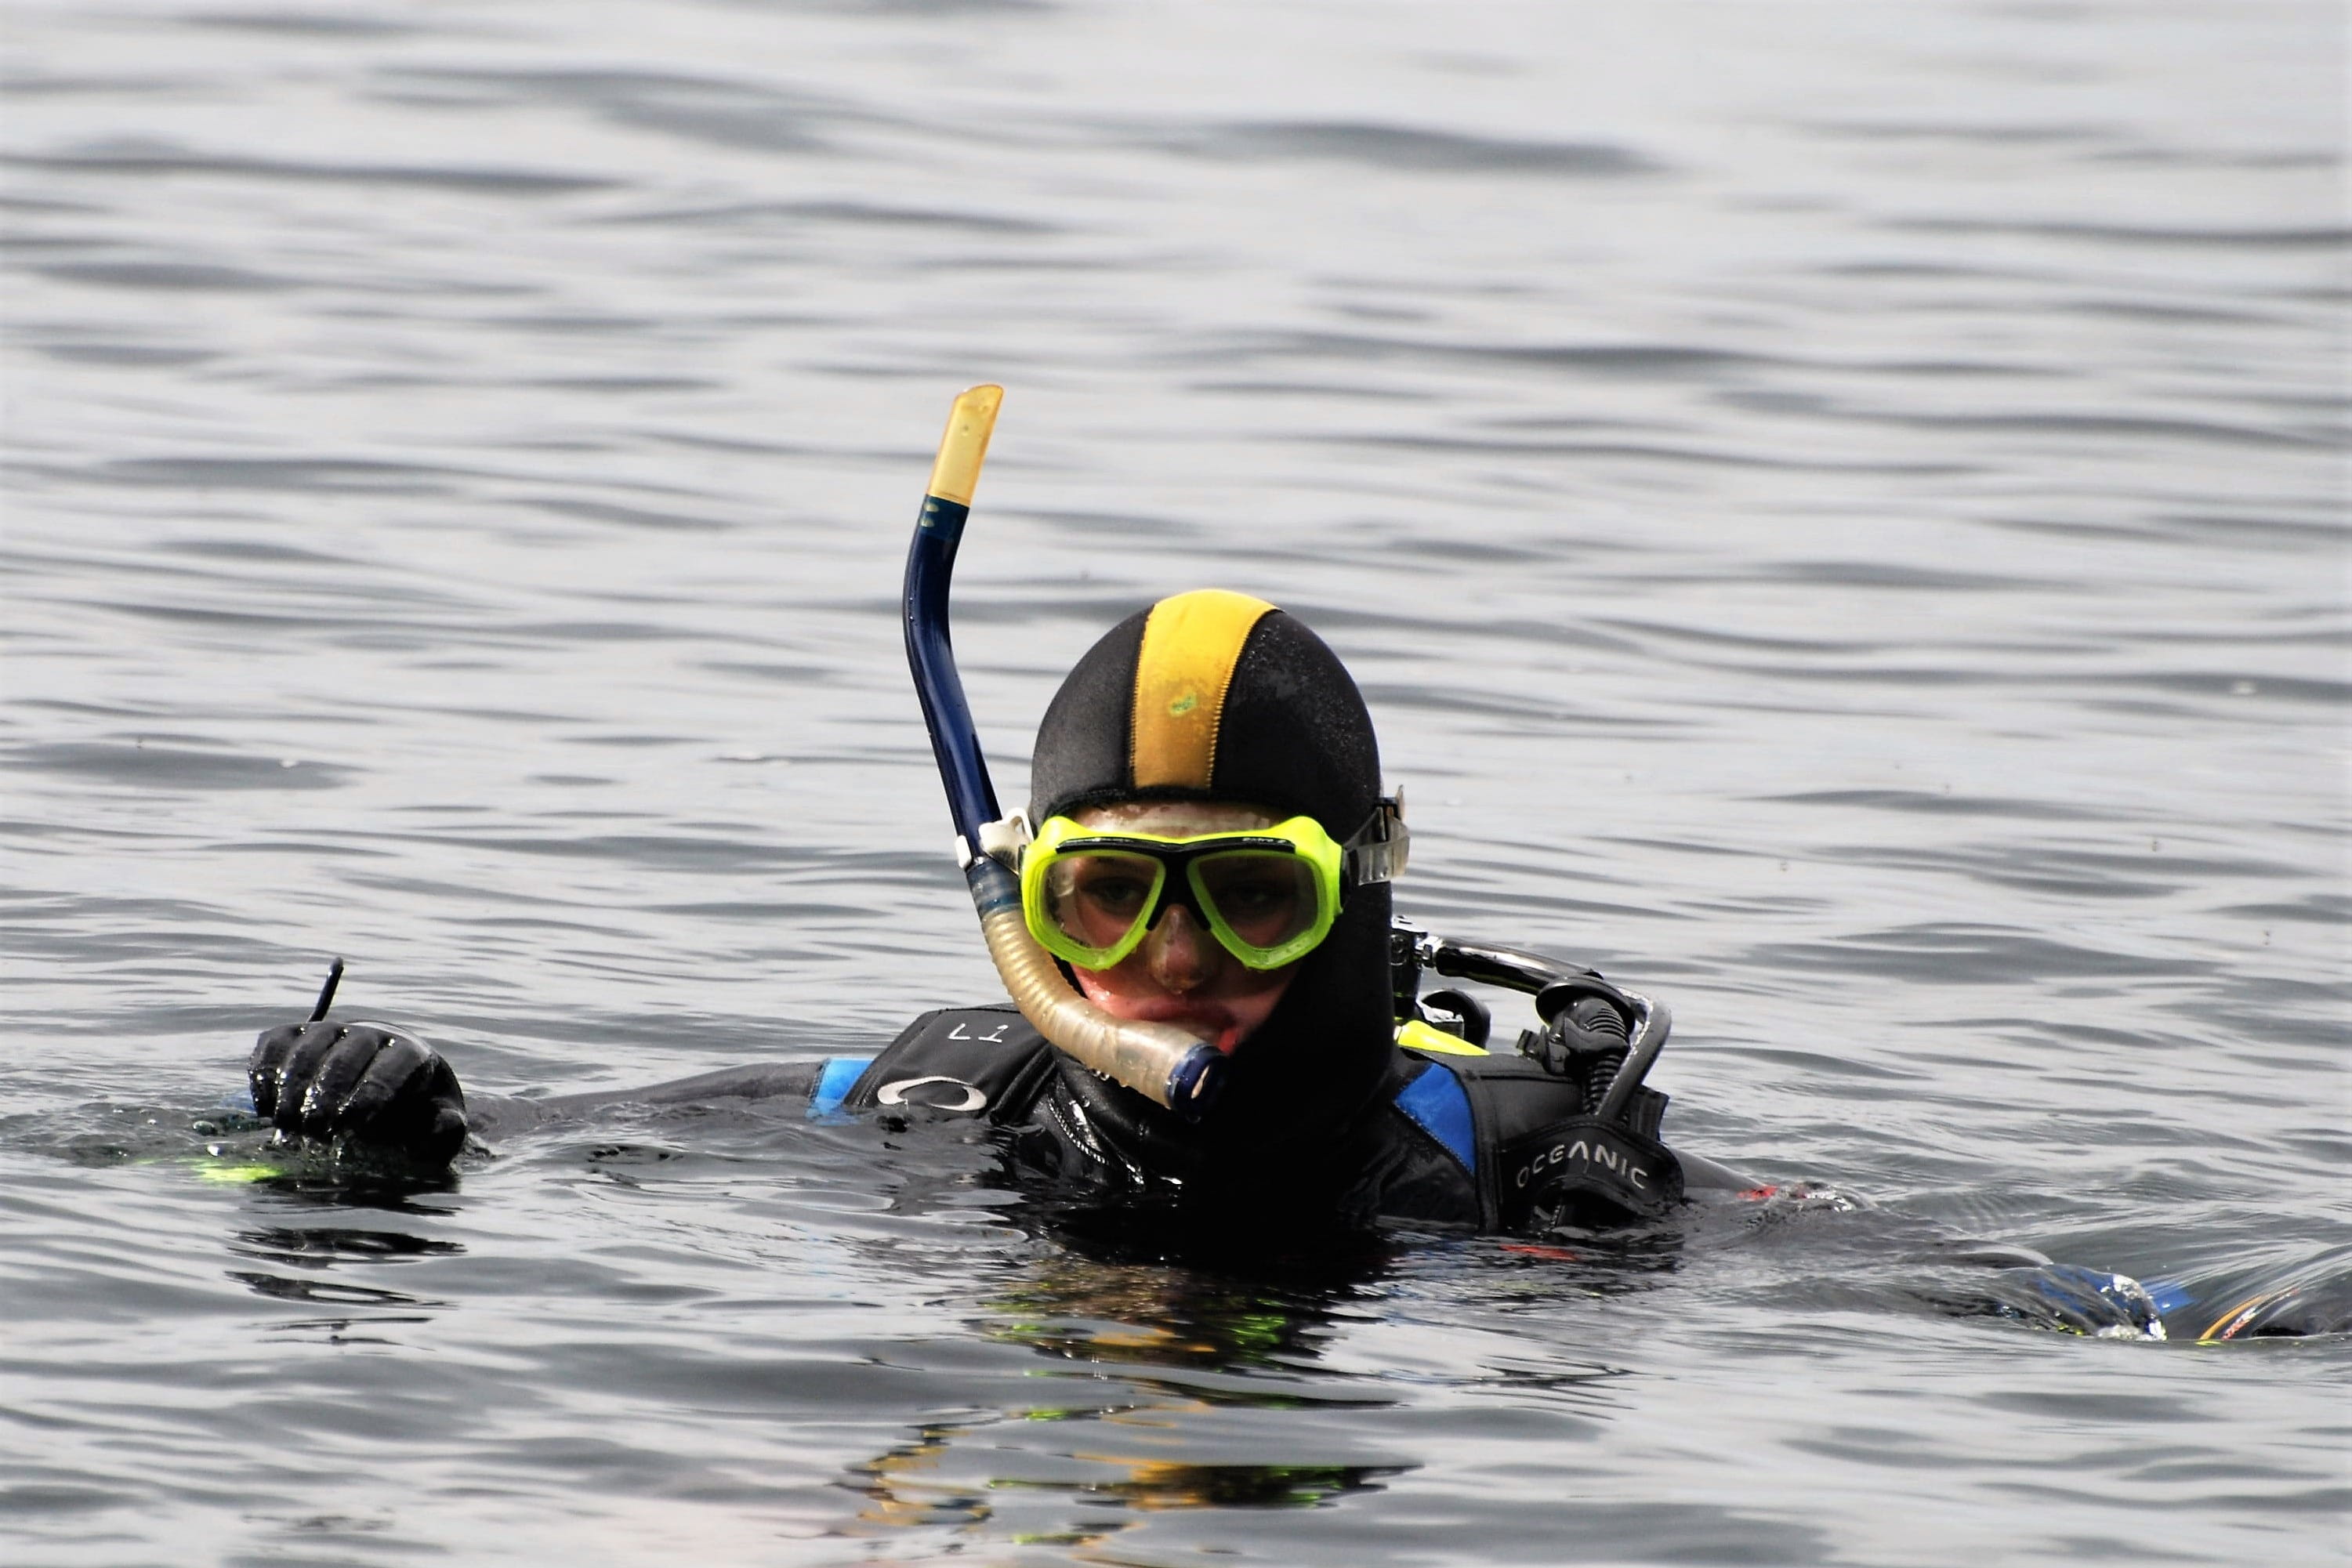 divers, check-out, open water, ocean, sea, activity, maritime